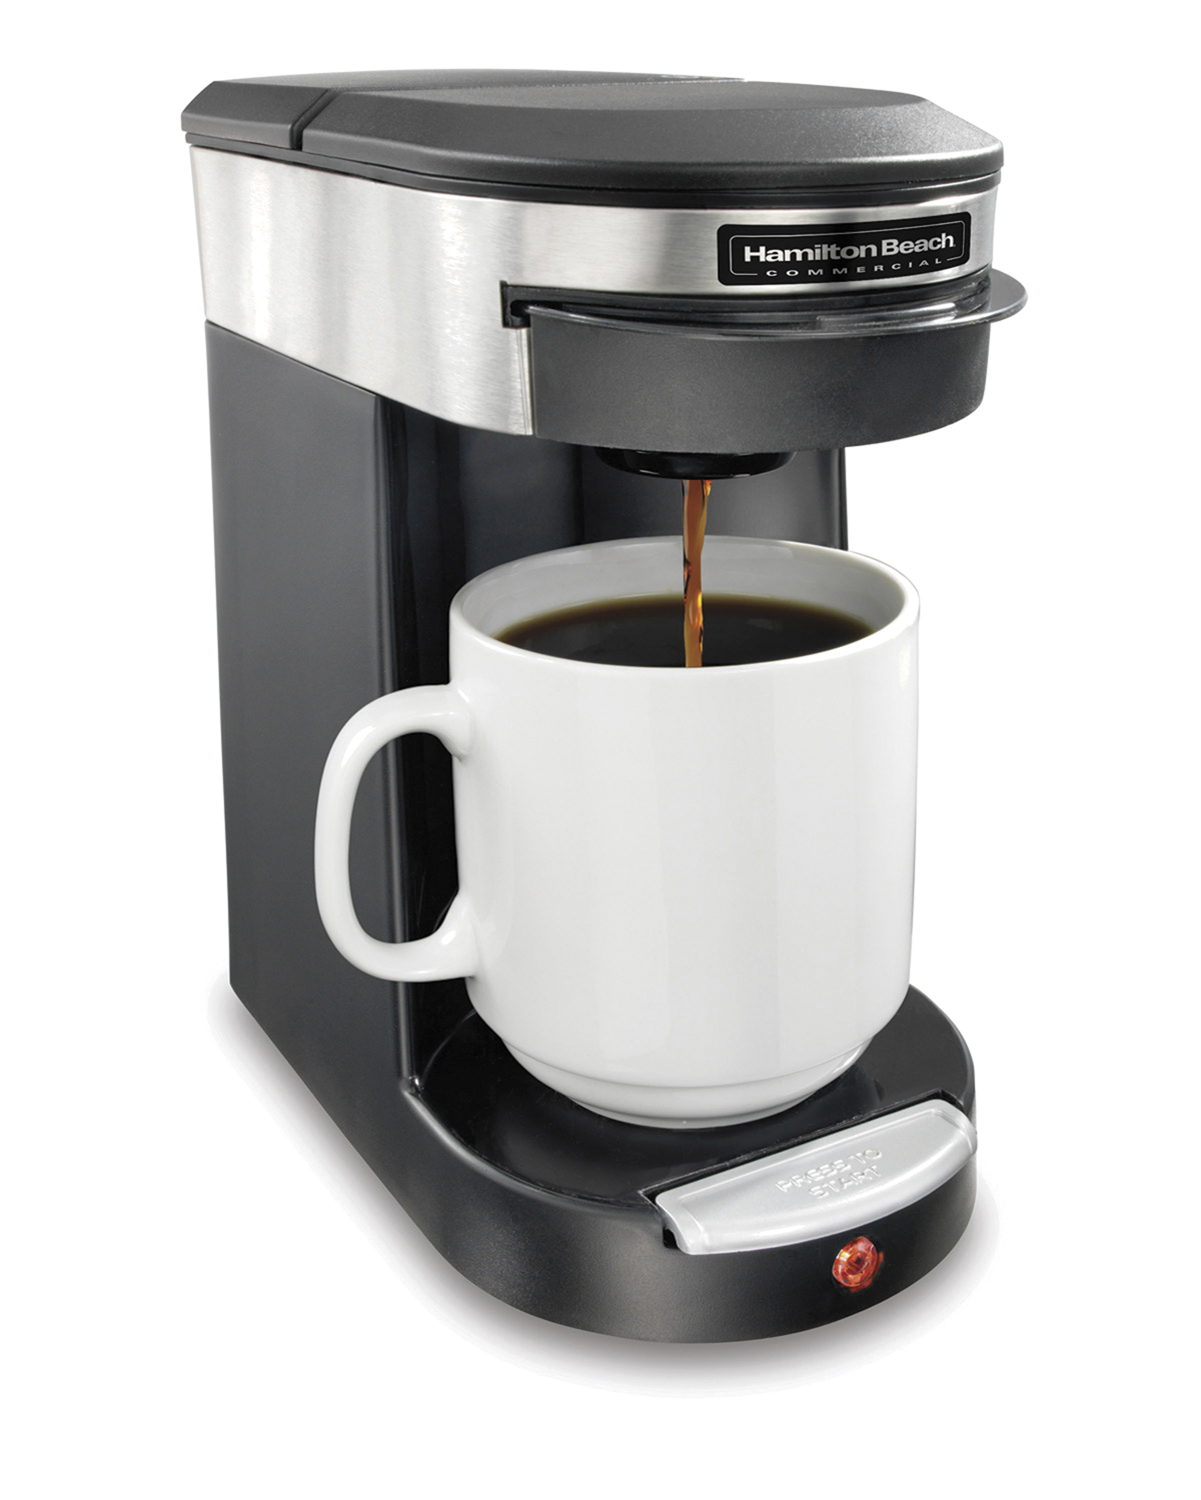 Deluxe 1 Cup Coffeemaker-Black/Stainless Steel (Case Pack Qty: 6)